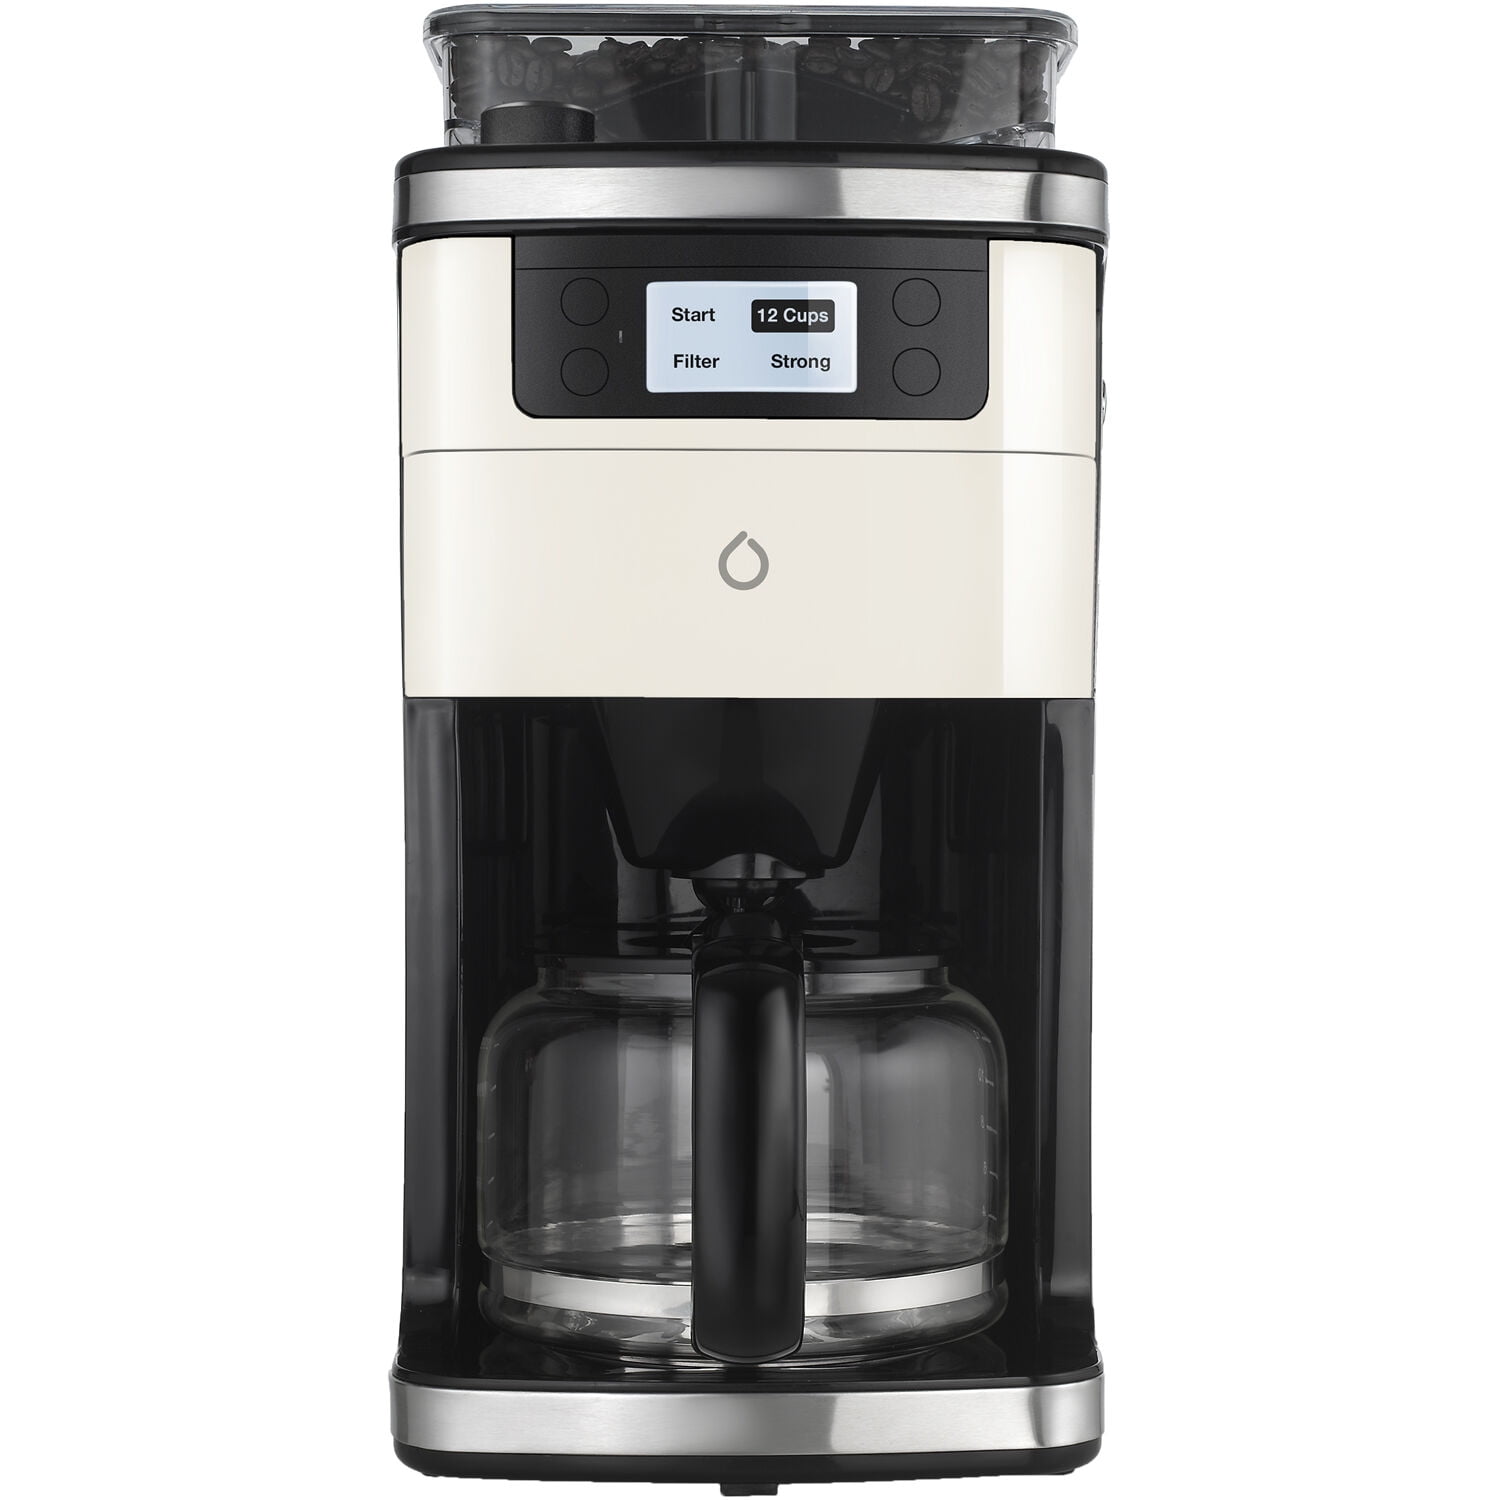  Ninja CFP451CO DualBrew System 14-Cup Coffee Maker,  Single-Serve Pods & Grounds, 4 Brew Styles, Built-In Fold Away Frother,  70-oz. Water Reservoir Carafe, Black (Renewed) Extra Large